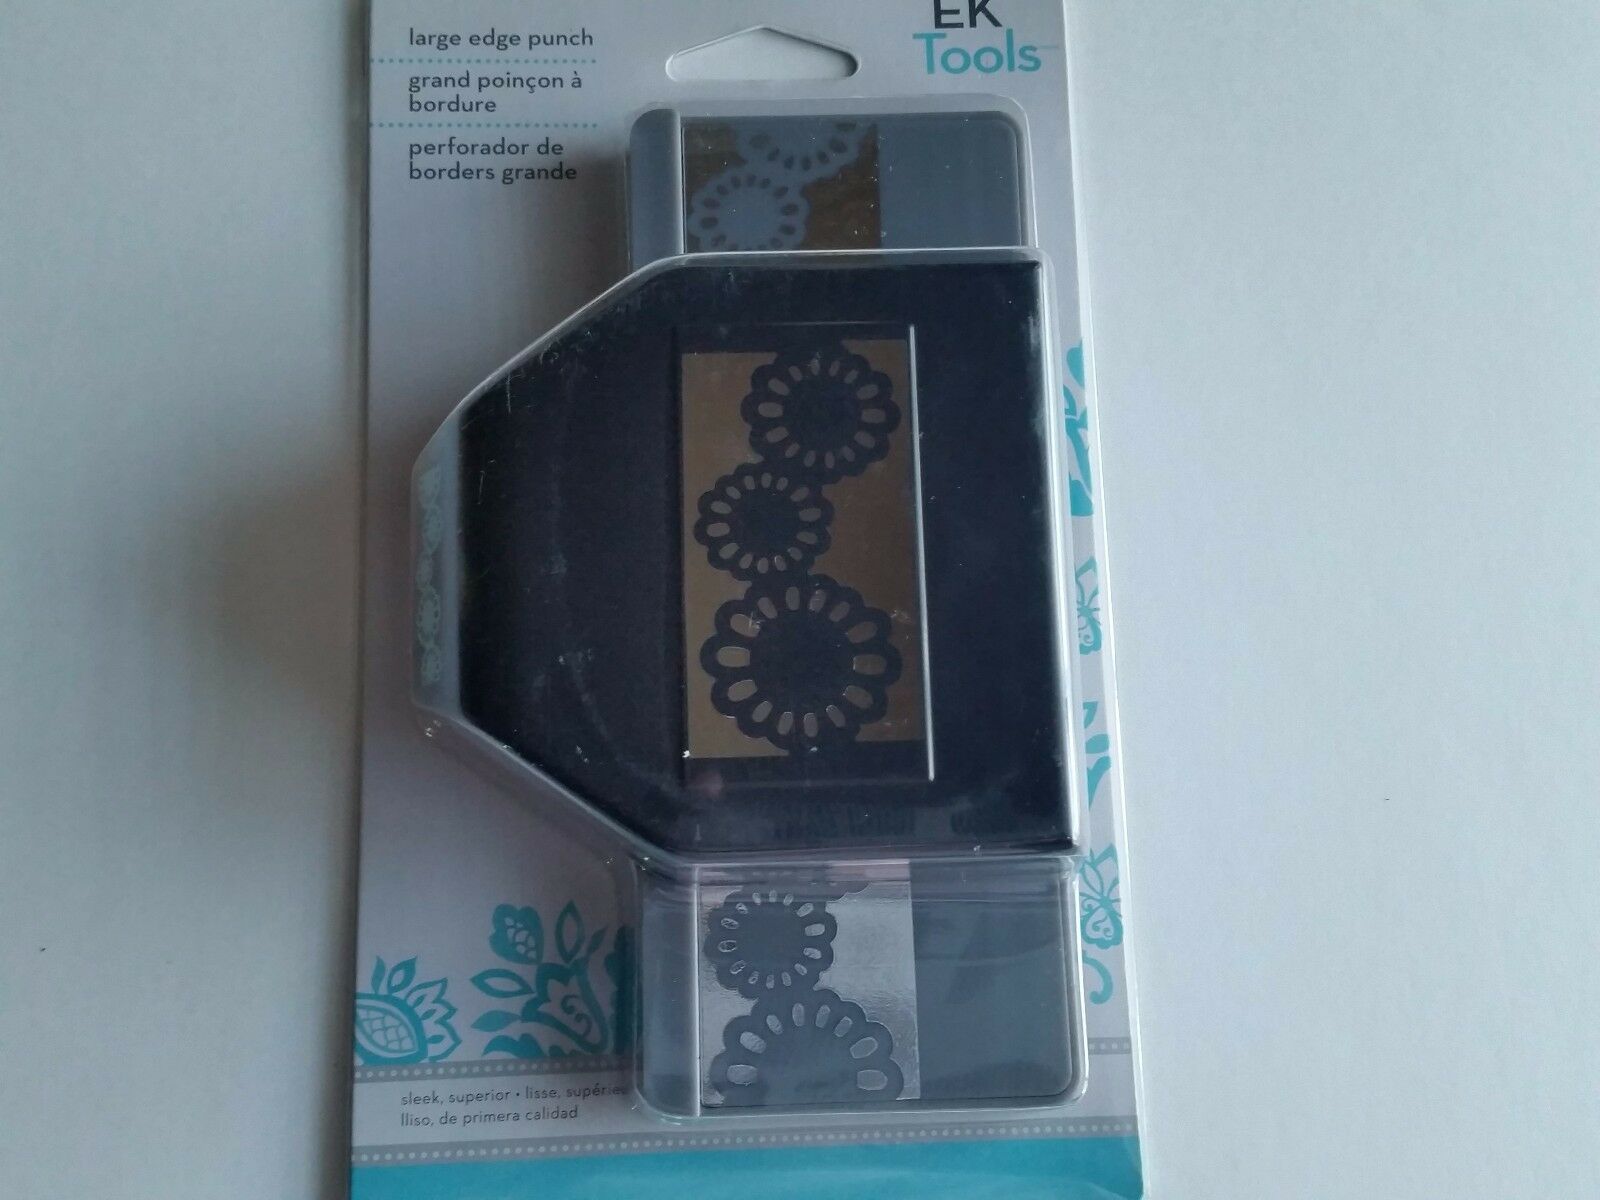 EK Success - Paper Shapers Extra Large Lever Punch - Star